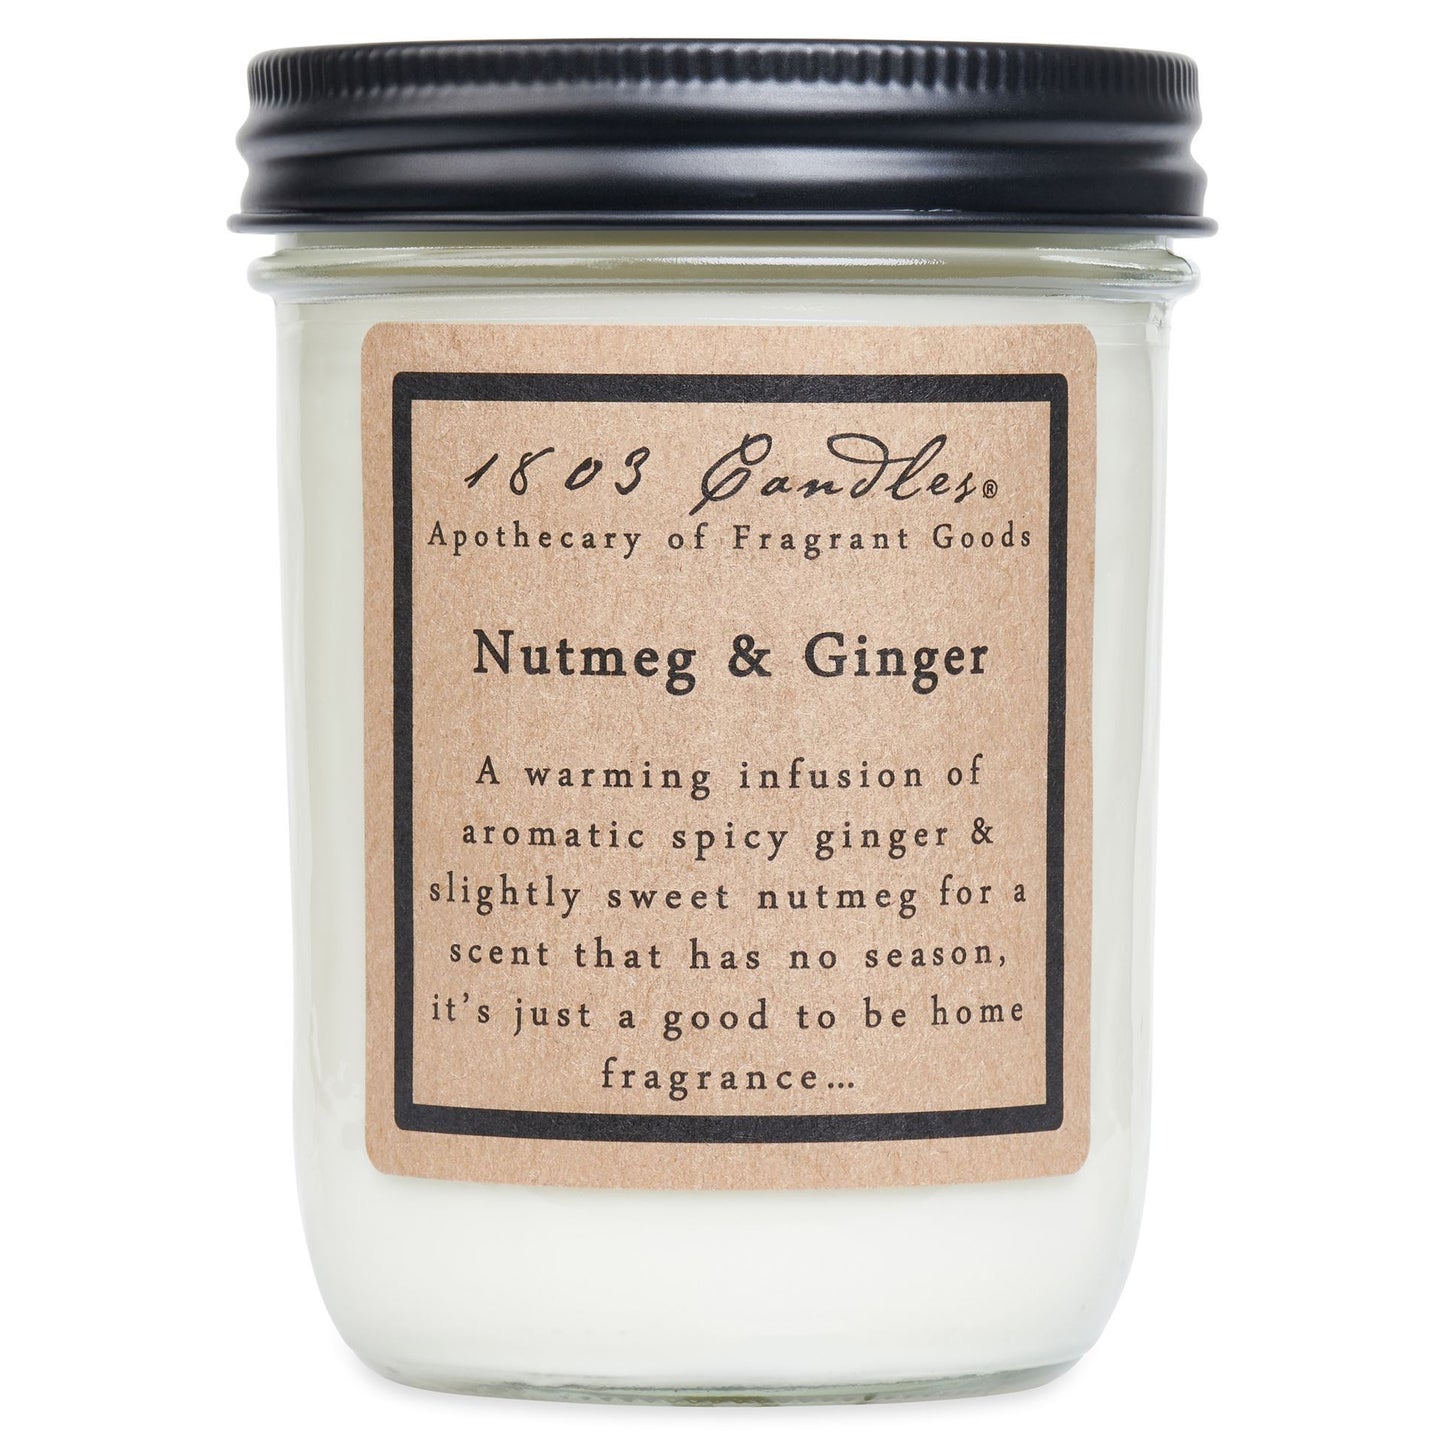 NUTMEG & GINGER - 14OZ JAR CANDLE by 1803 Candles